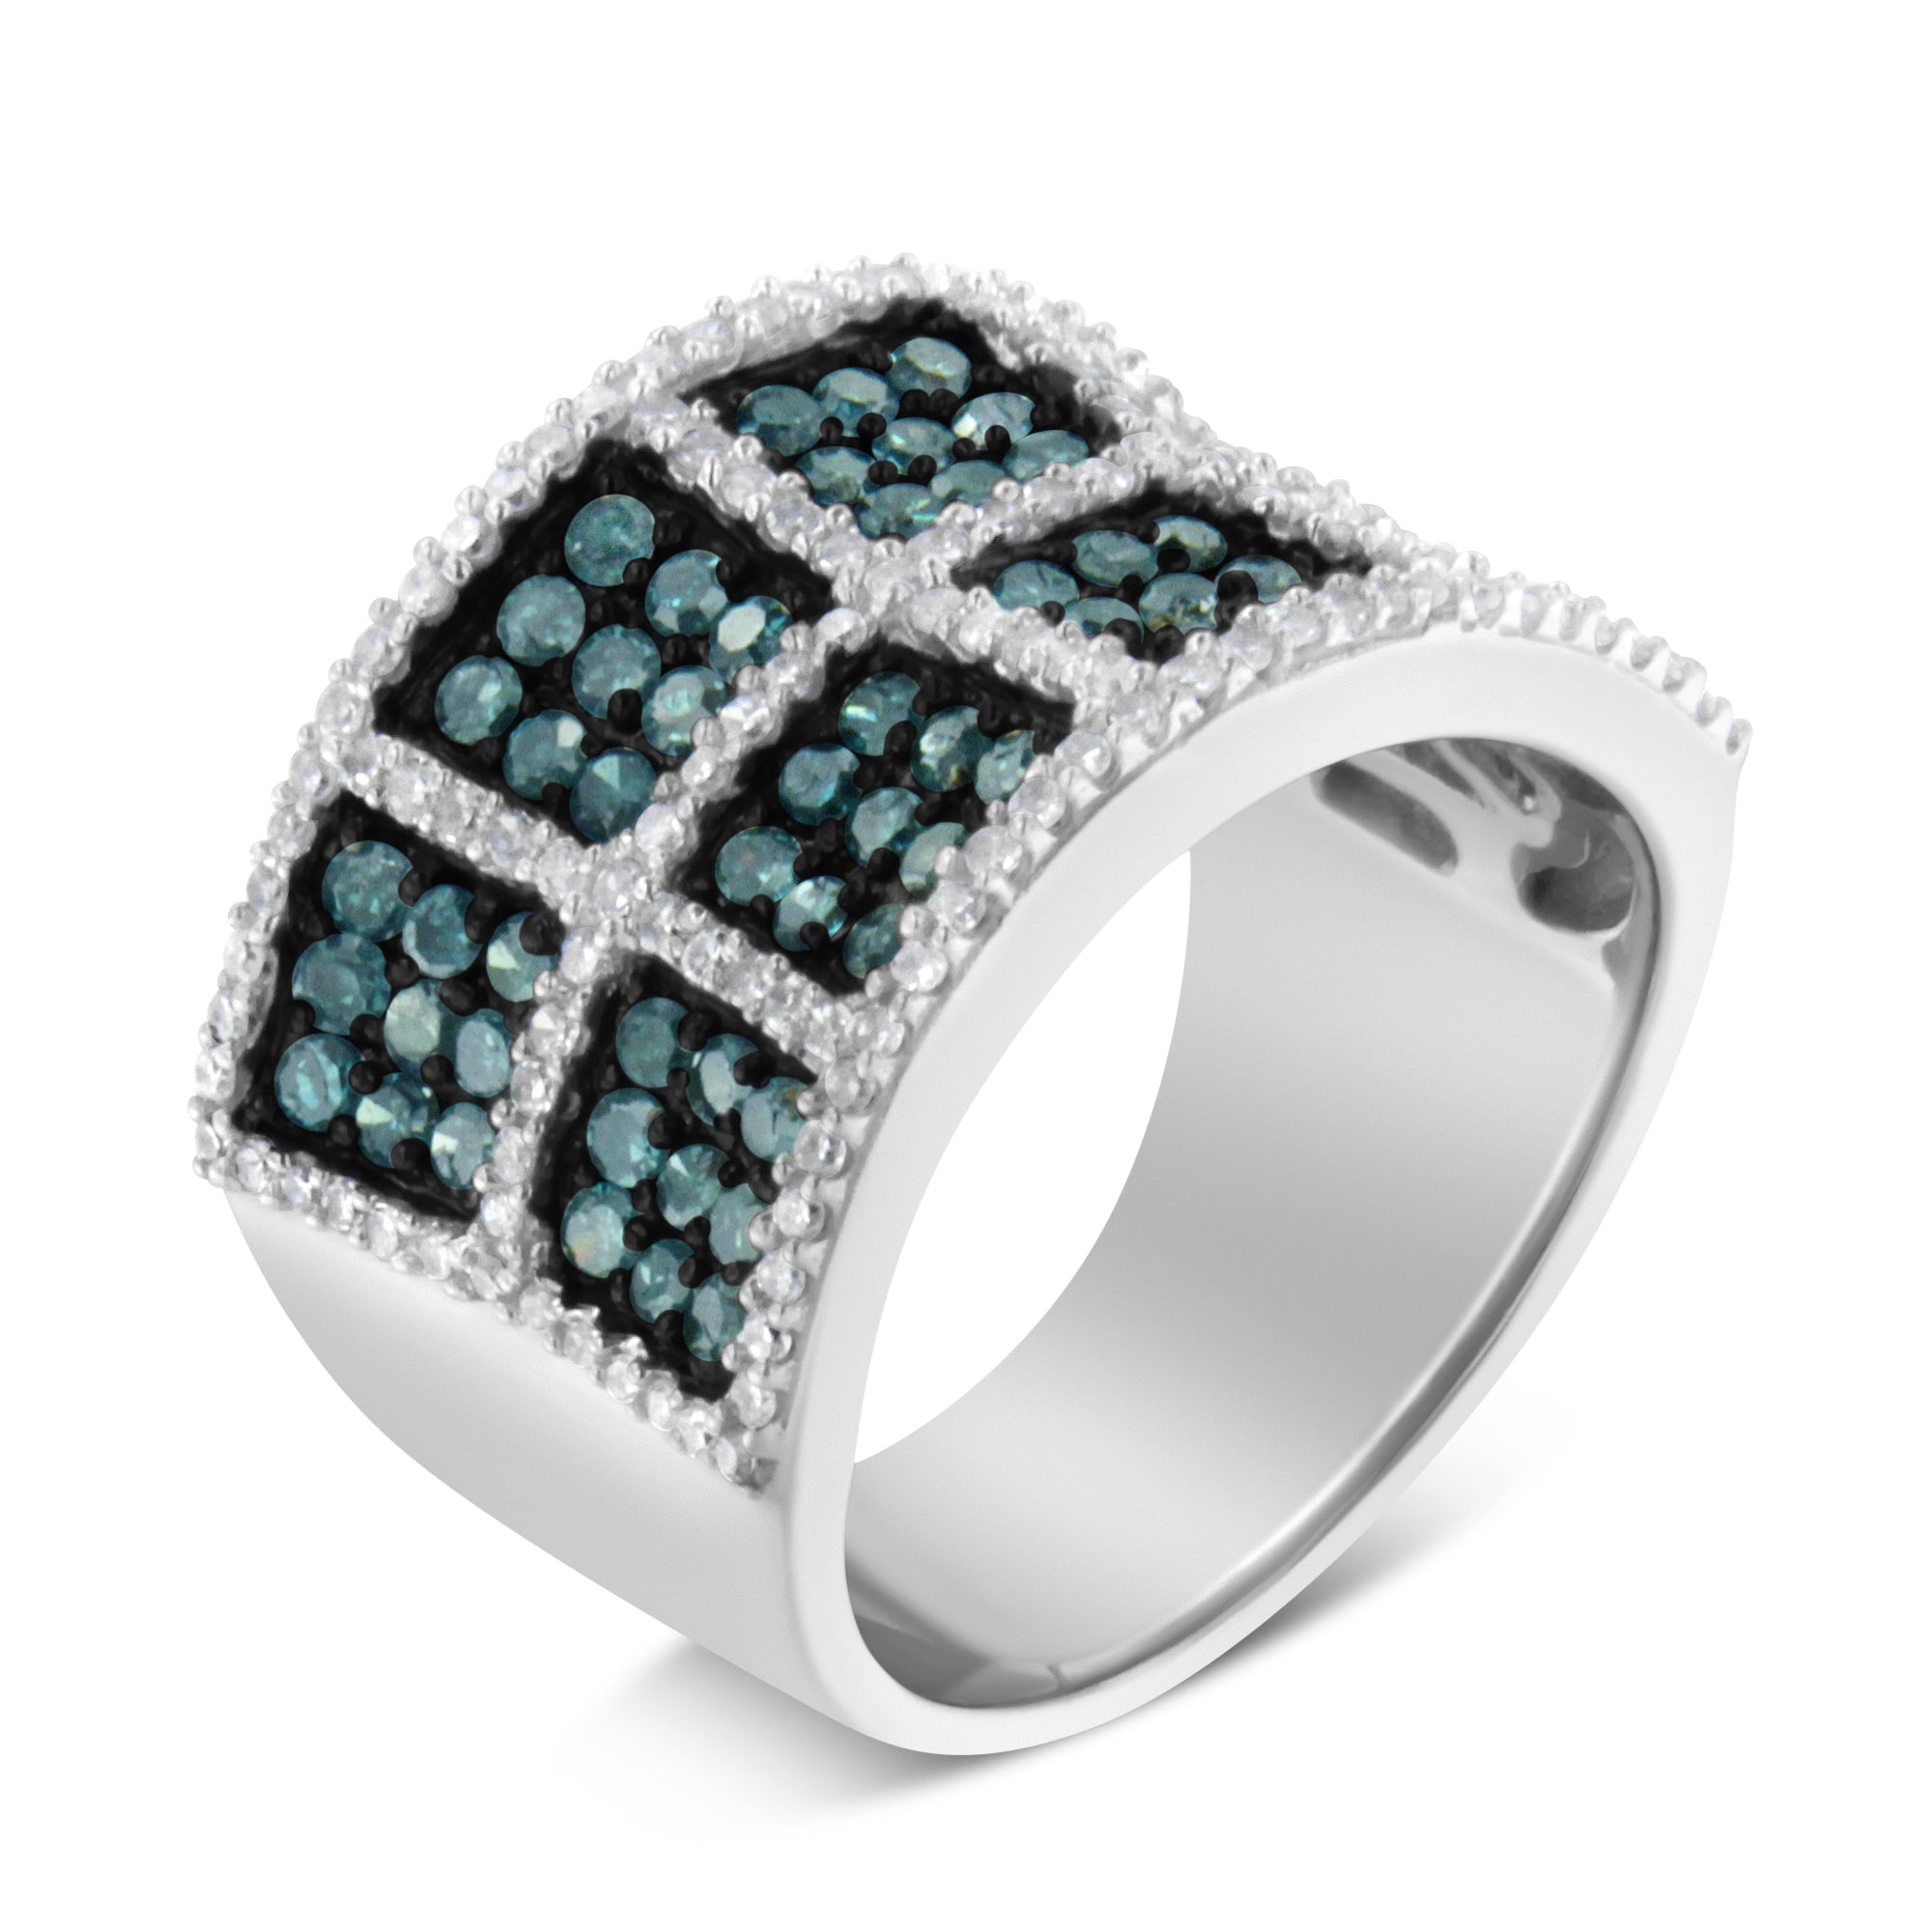 14K White Gold White and Blue Diamond Cocktail Ring - Size 6